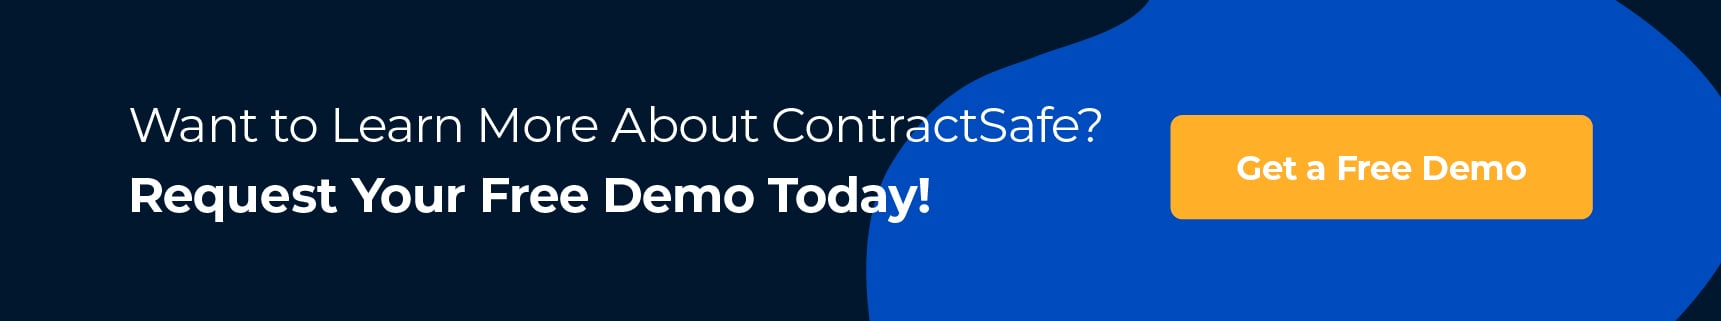 Want to Learn More About ContractSafe? Request Your Free Demo Today!